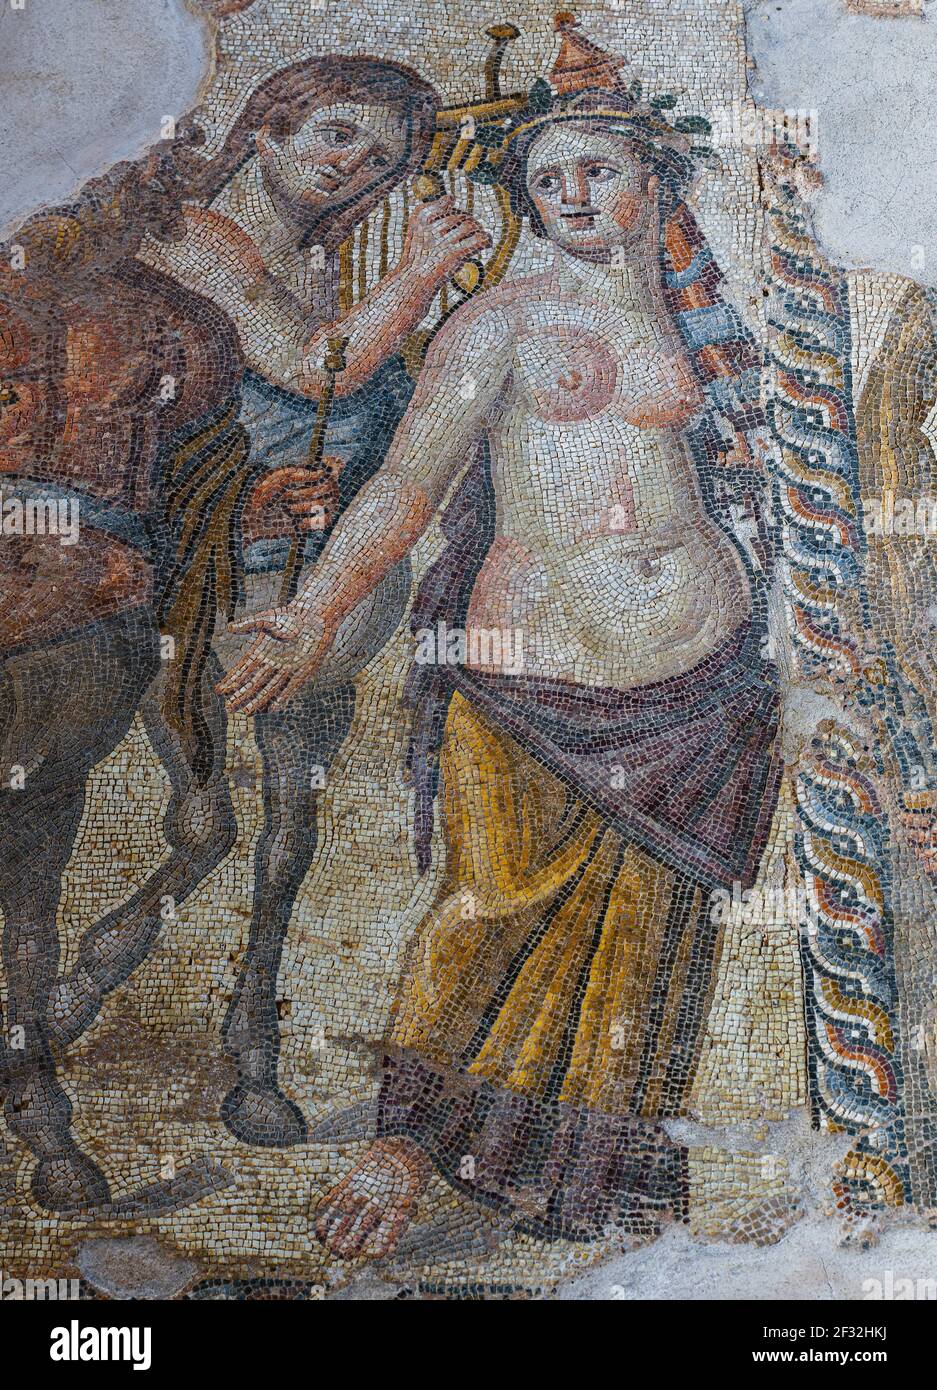 Mosaic, Dionysus Train, Centaur and Maenad, House of Aion, Archaeological Site, Archaeological Park, Paphos, Cyprus Stock Photo